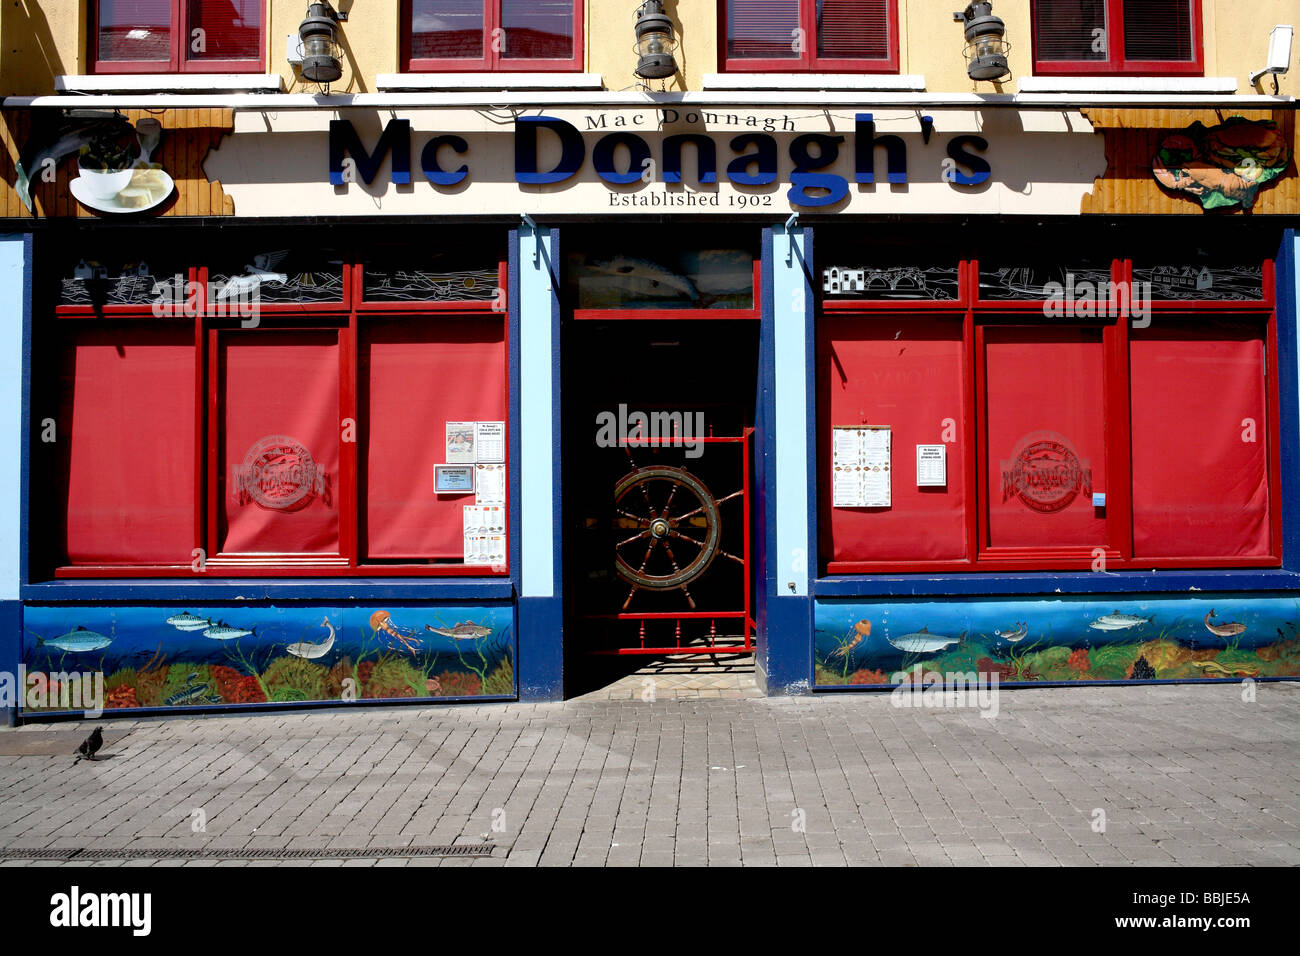 Mc Donaghs Seafood Restaurant Galway County Galway Ireland Stock Photo